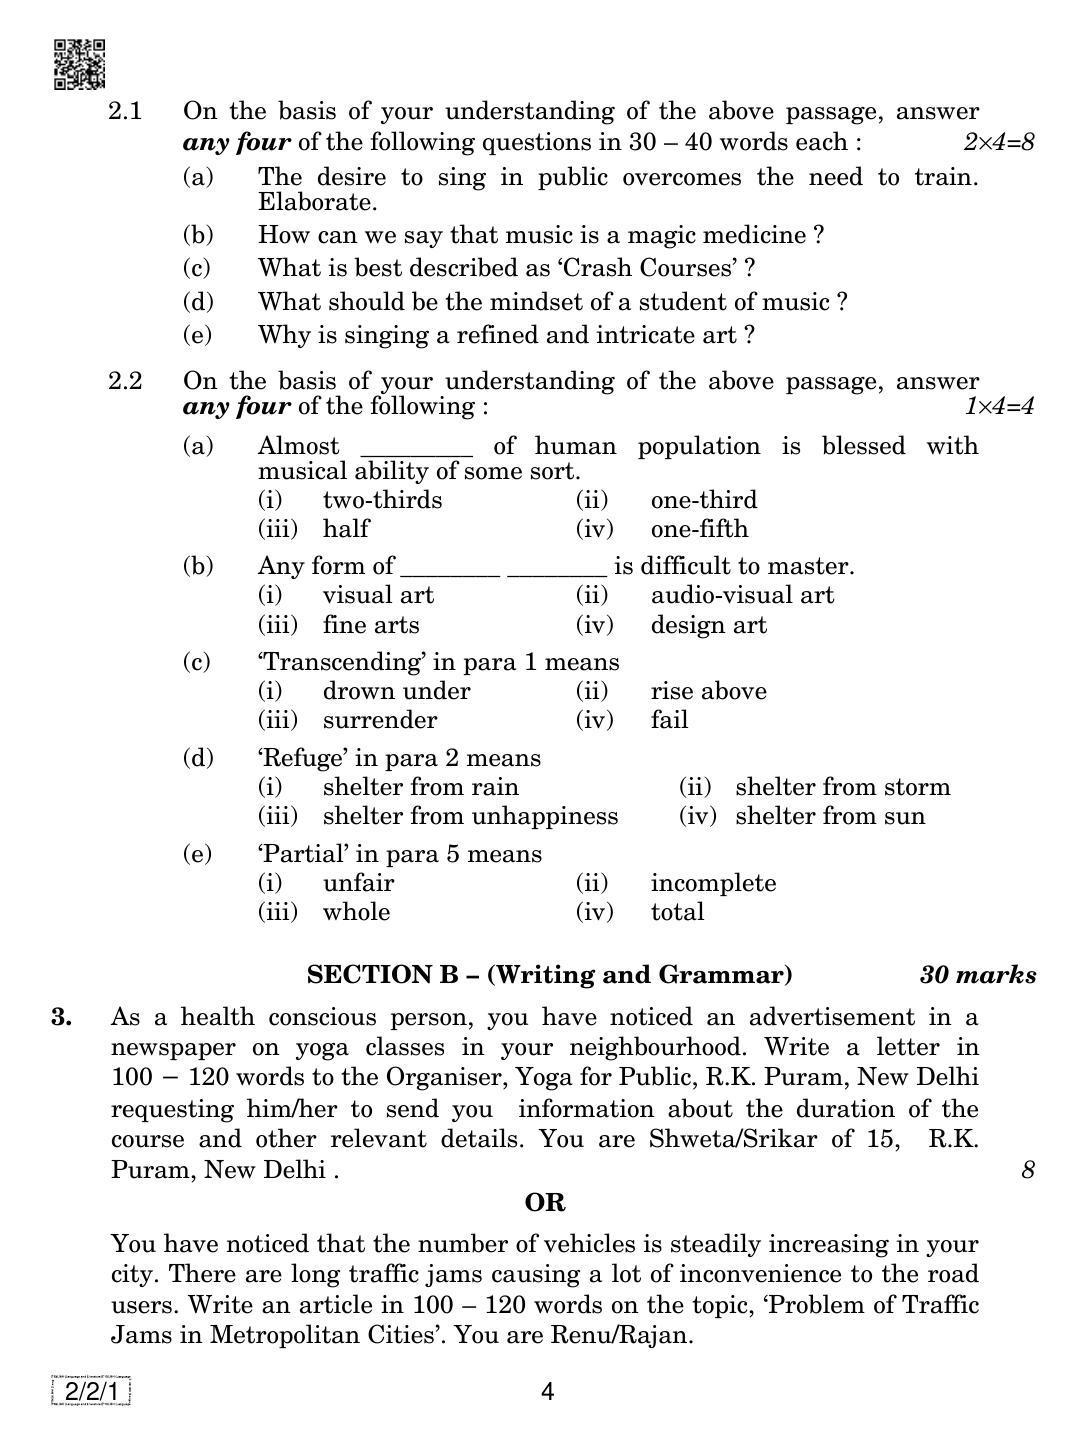 CBSE Class 10 2-2-1 ENGLISH LANGUAGE AND LETERATURE 2019 Question Paper - Page 4